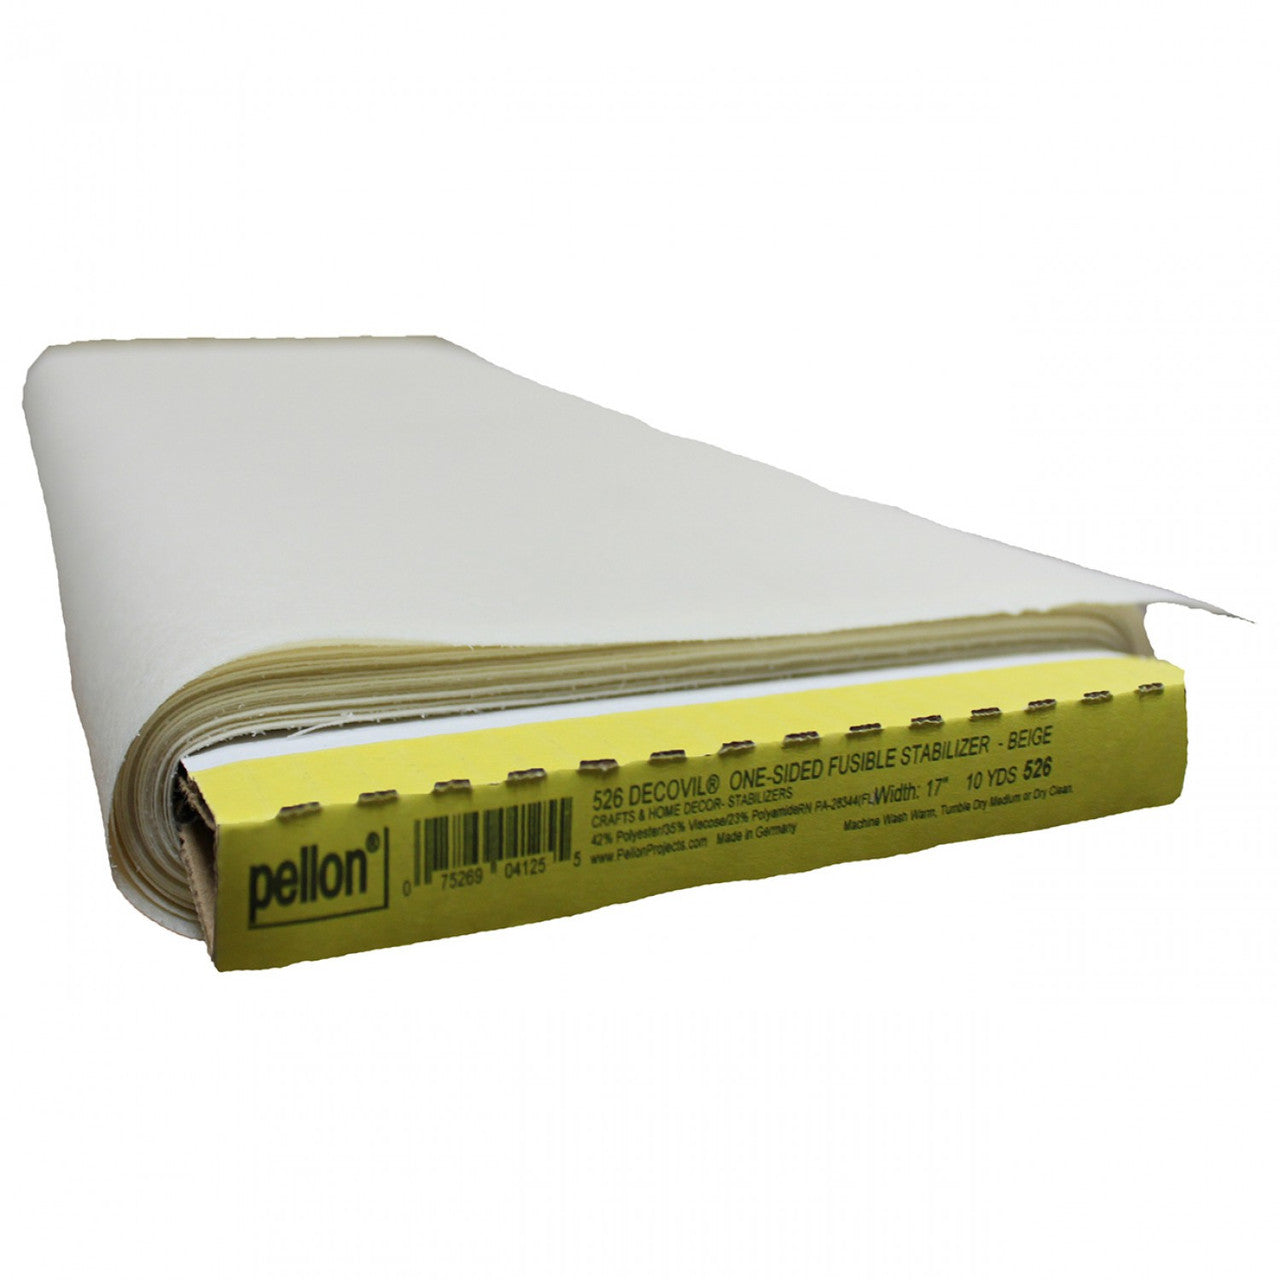 Decovil Fusible Interfacing - Beige